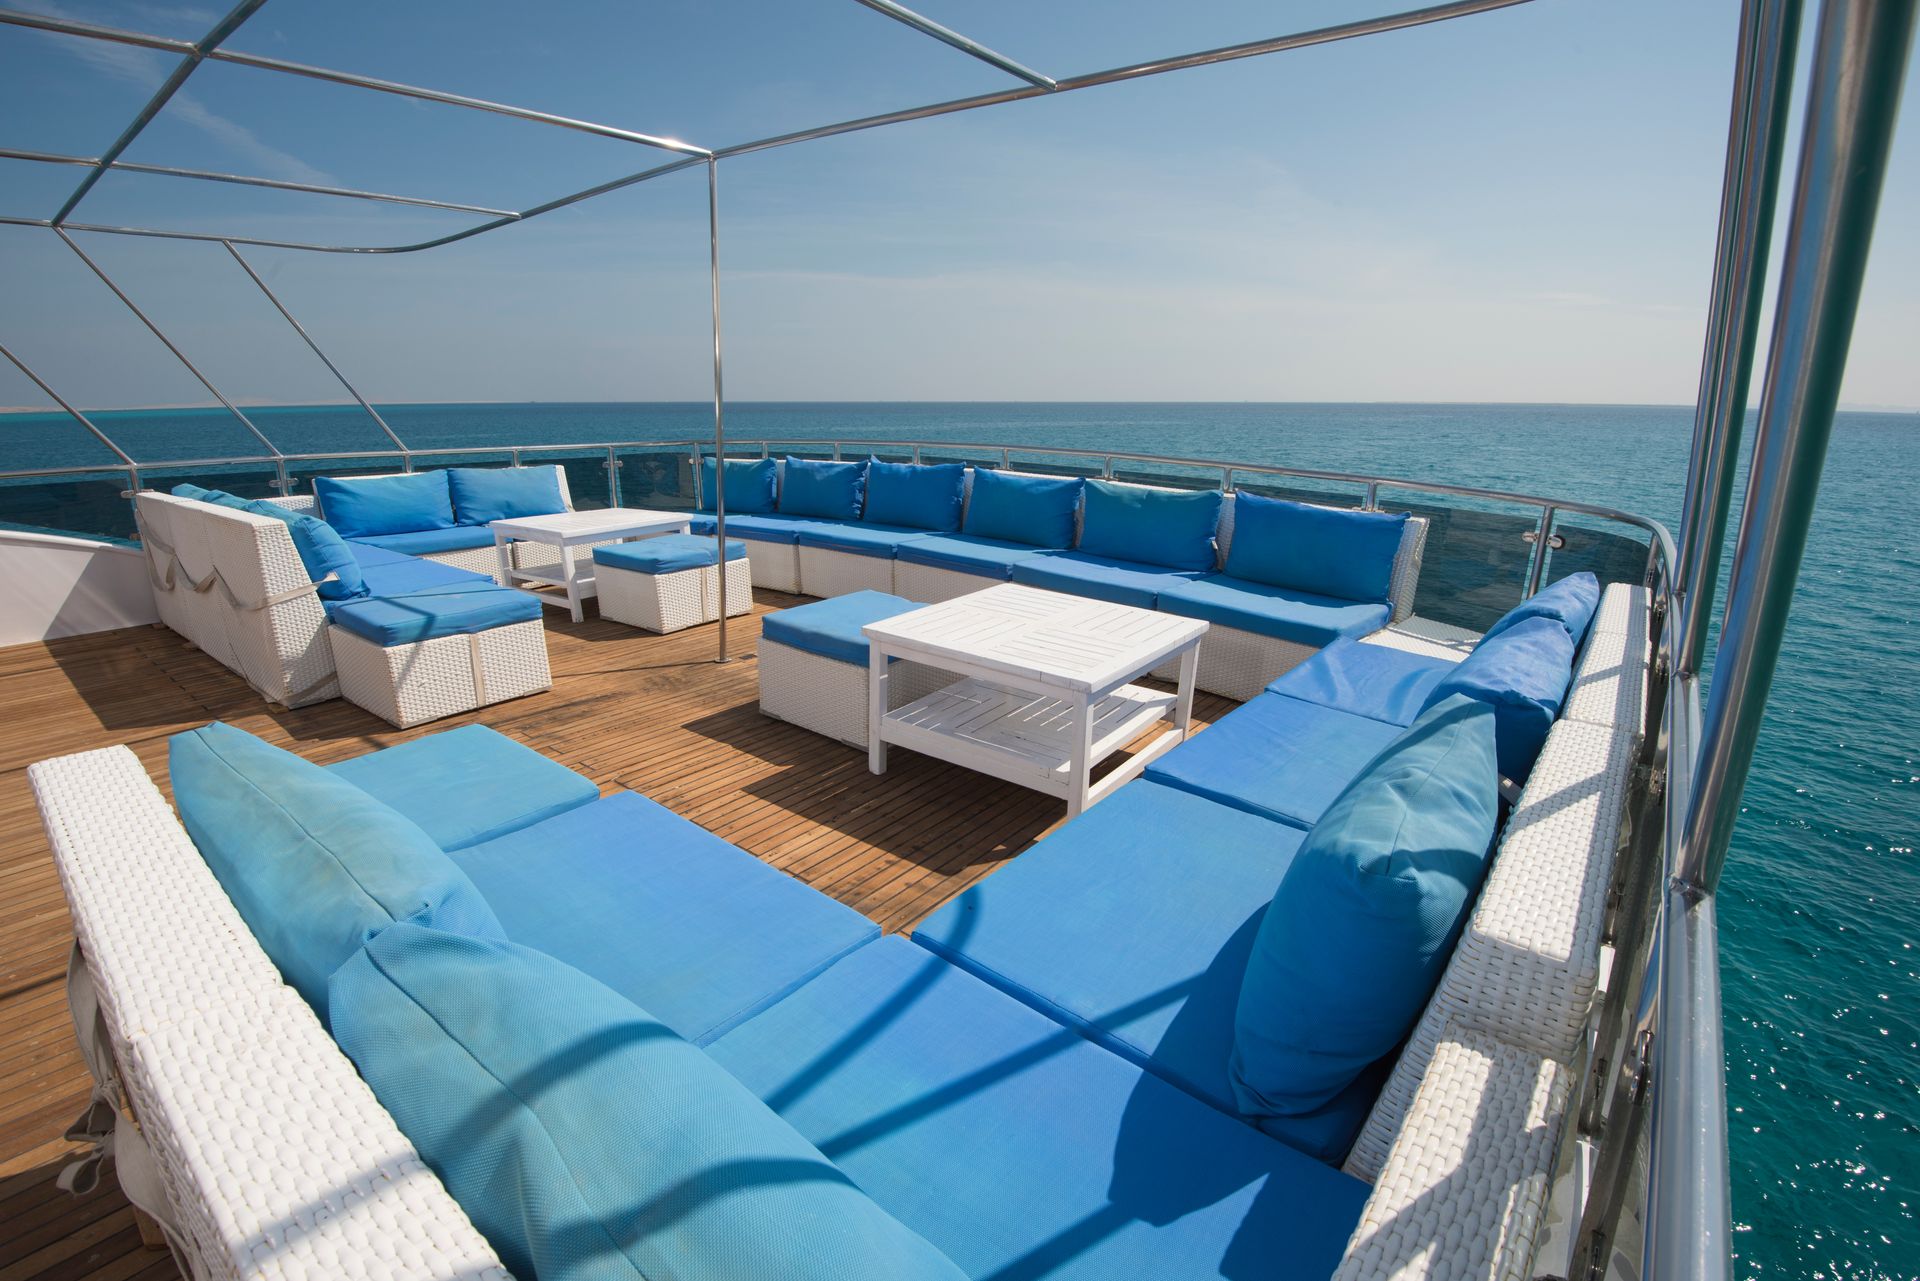 Large white outdoor lounge set with blue upholstered cushions on deck of boat on the ocean